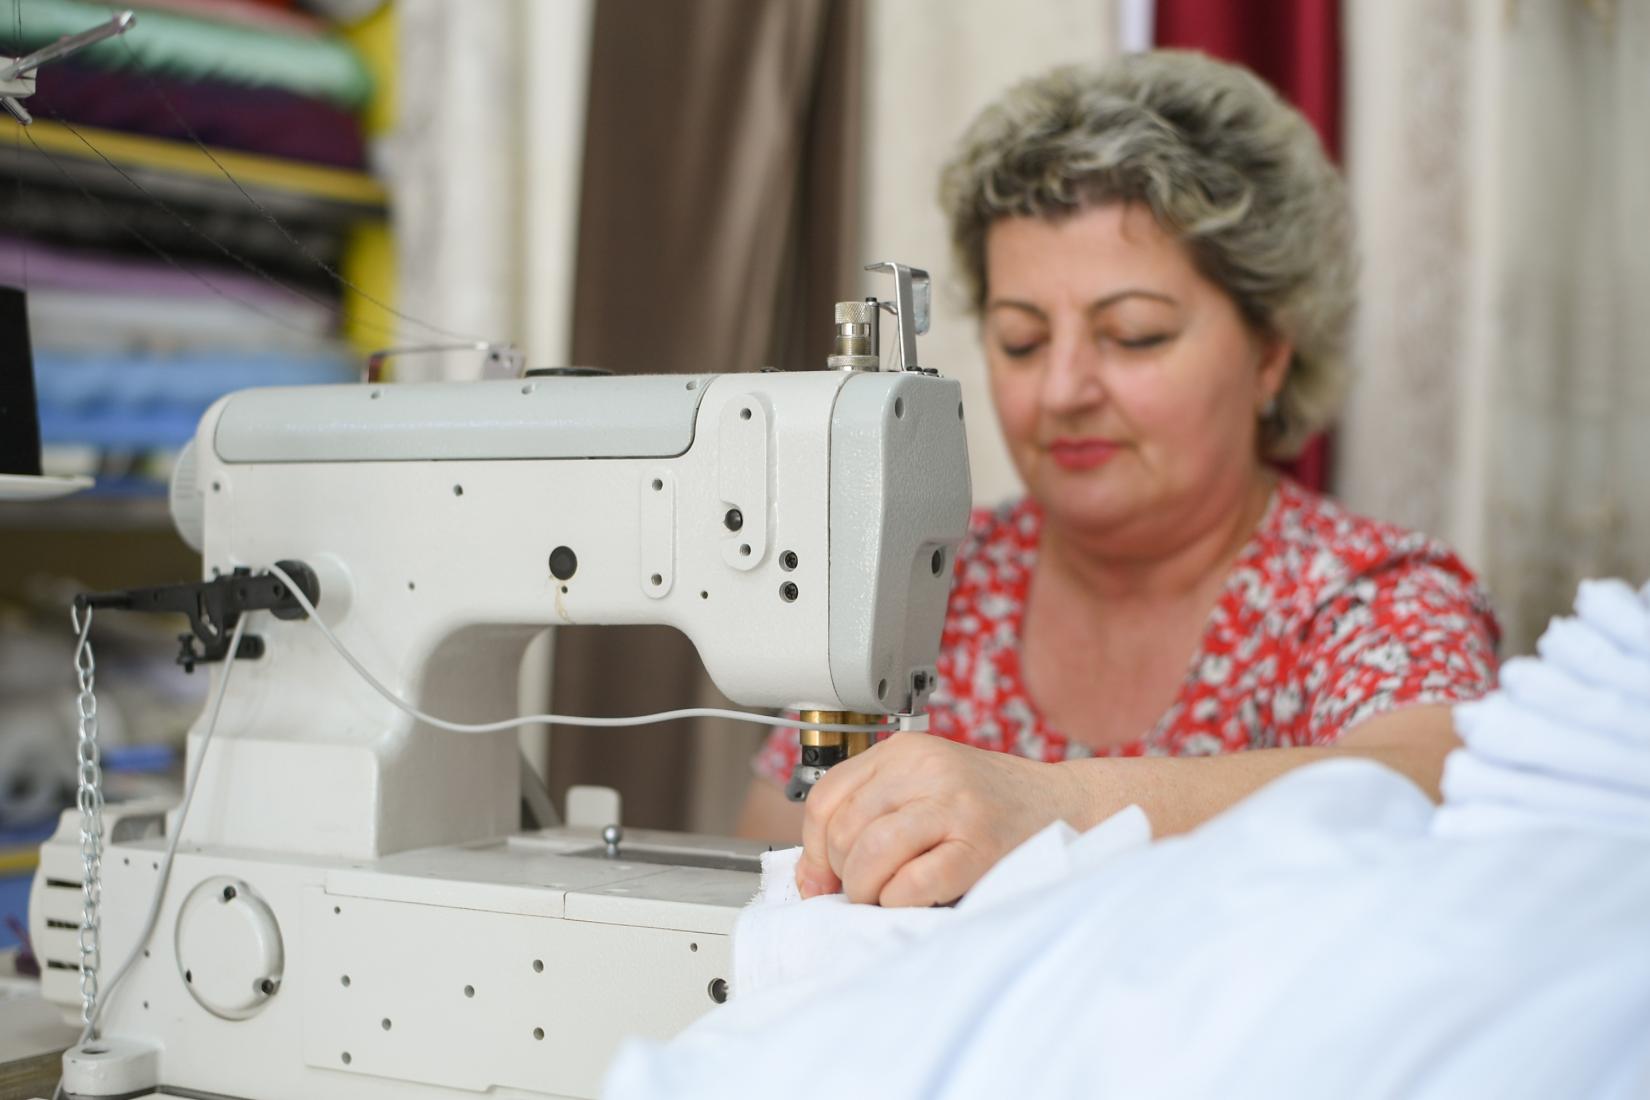 Lejla, during her work as a tailor with her new sewing machine provided by UNDP Albania under the Economic Recovery and Resilience Programme.